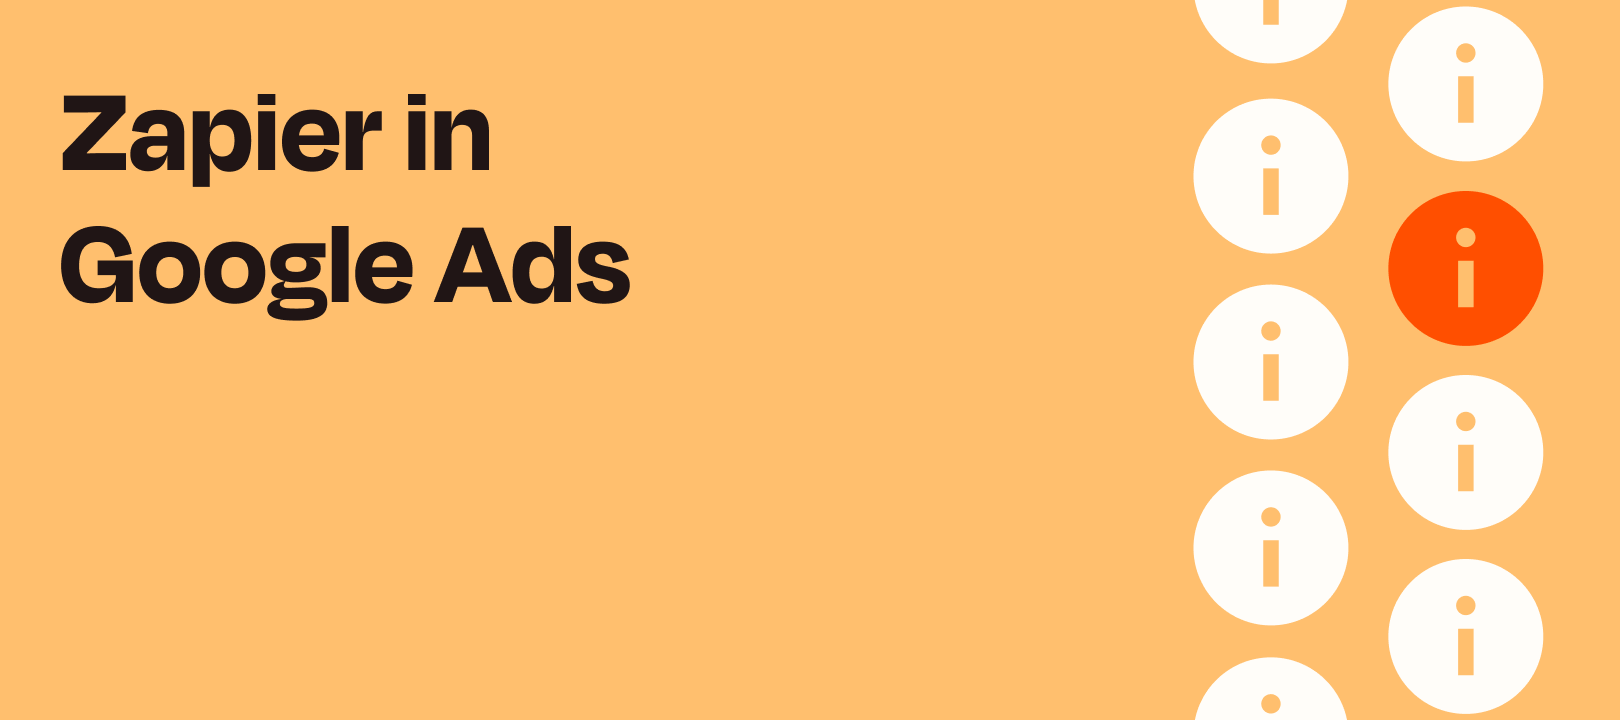 Google Ads are even better now with Zapier!